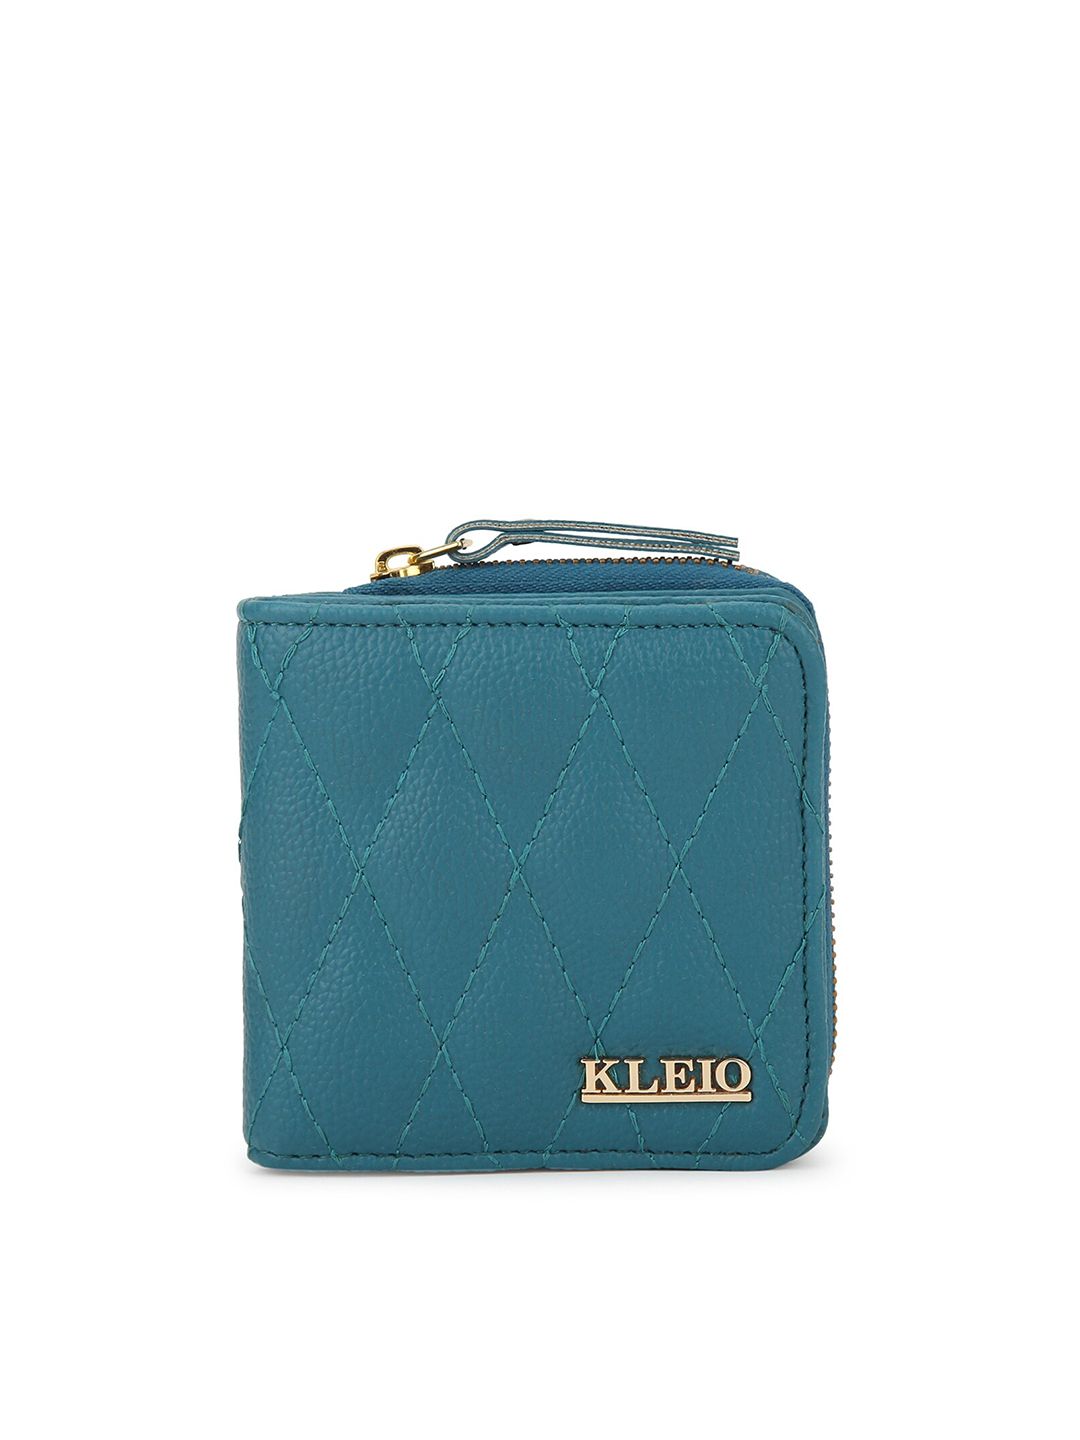 KLEIO Women Teal Textured Quilted Synthetic Leather Zip Around Wallet Price in India